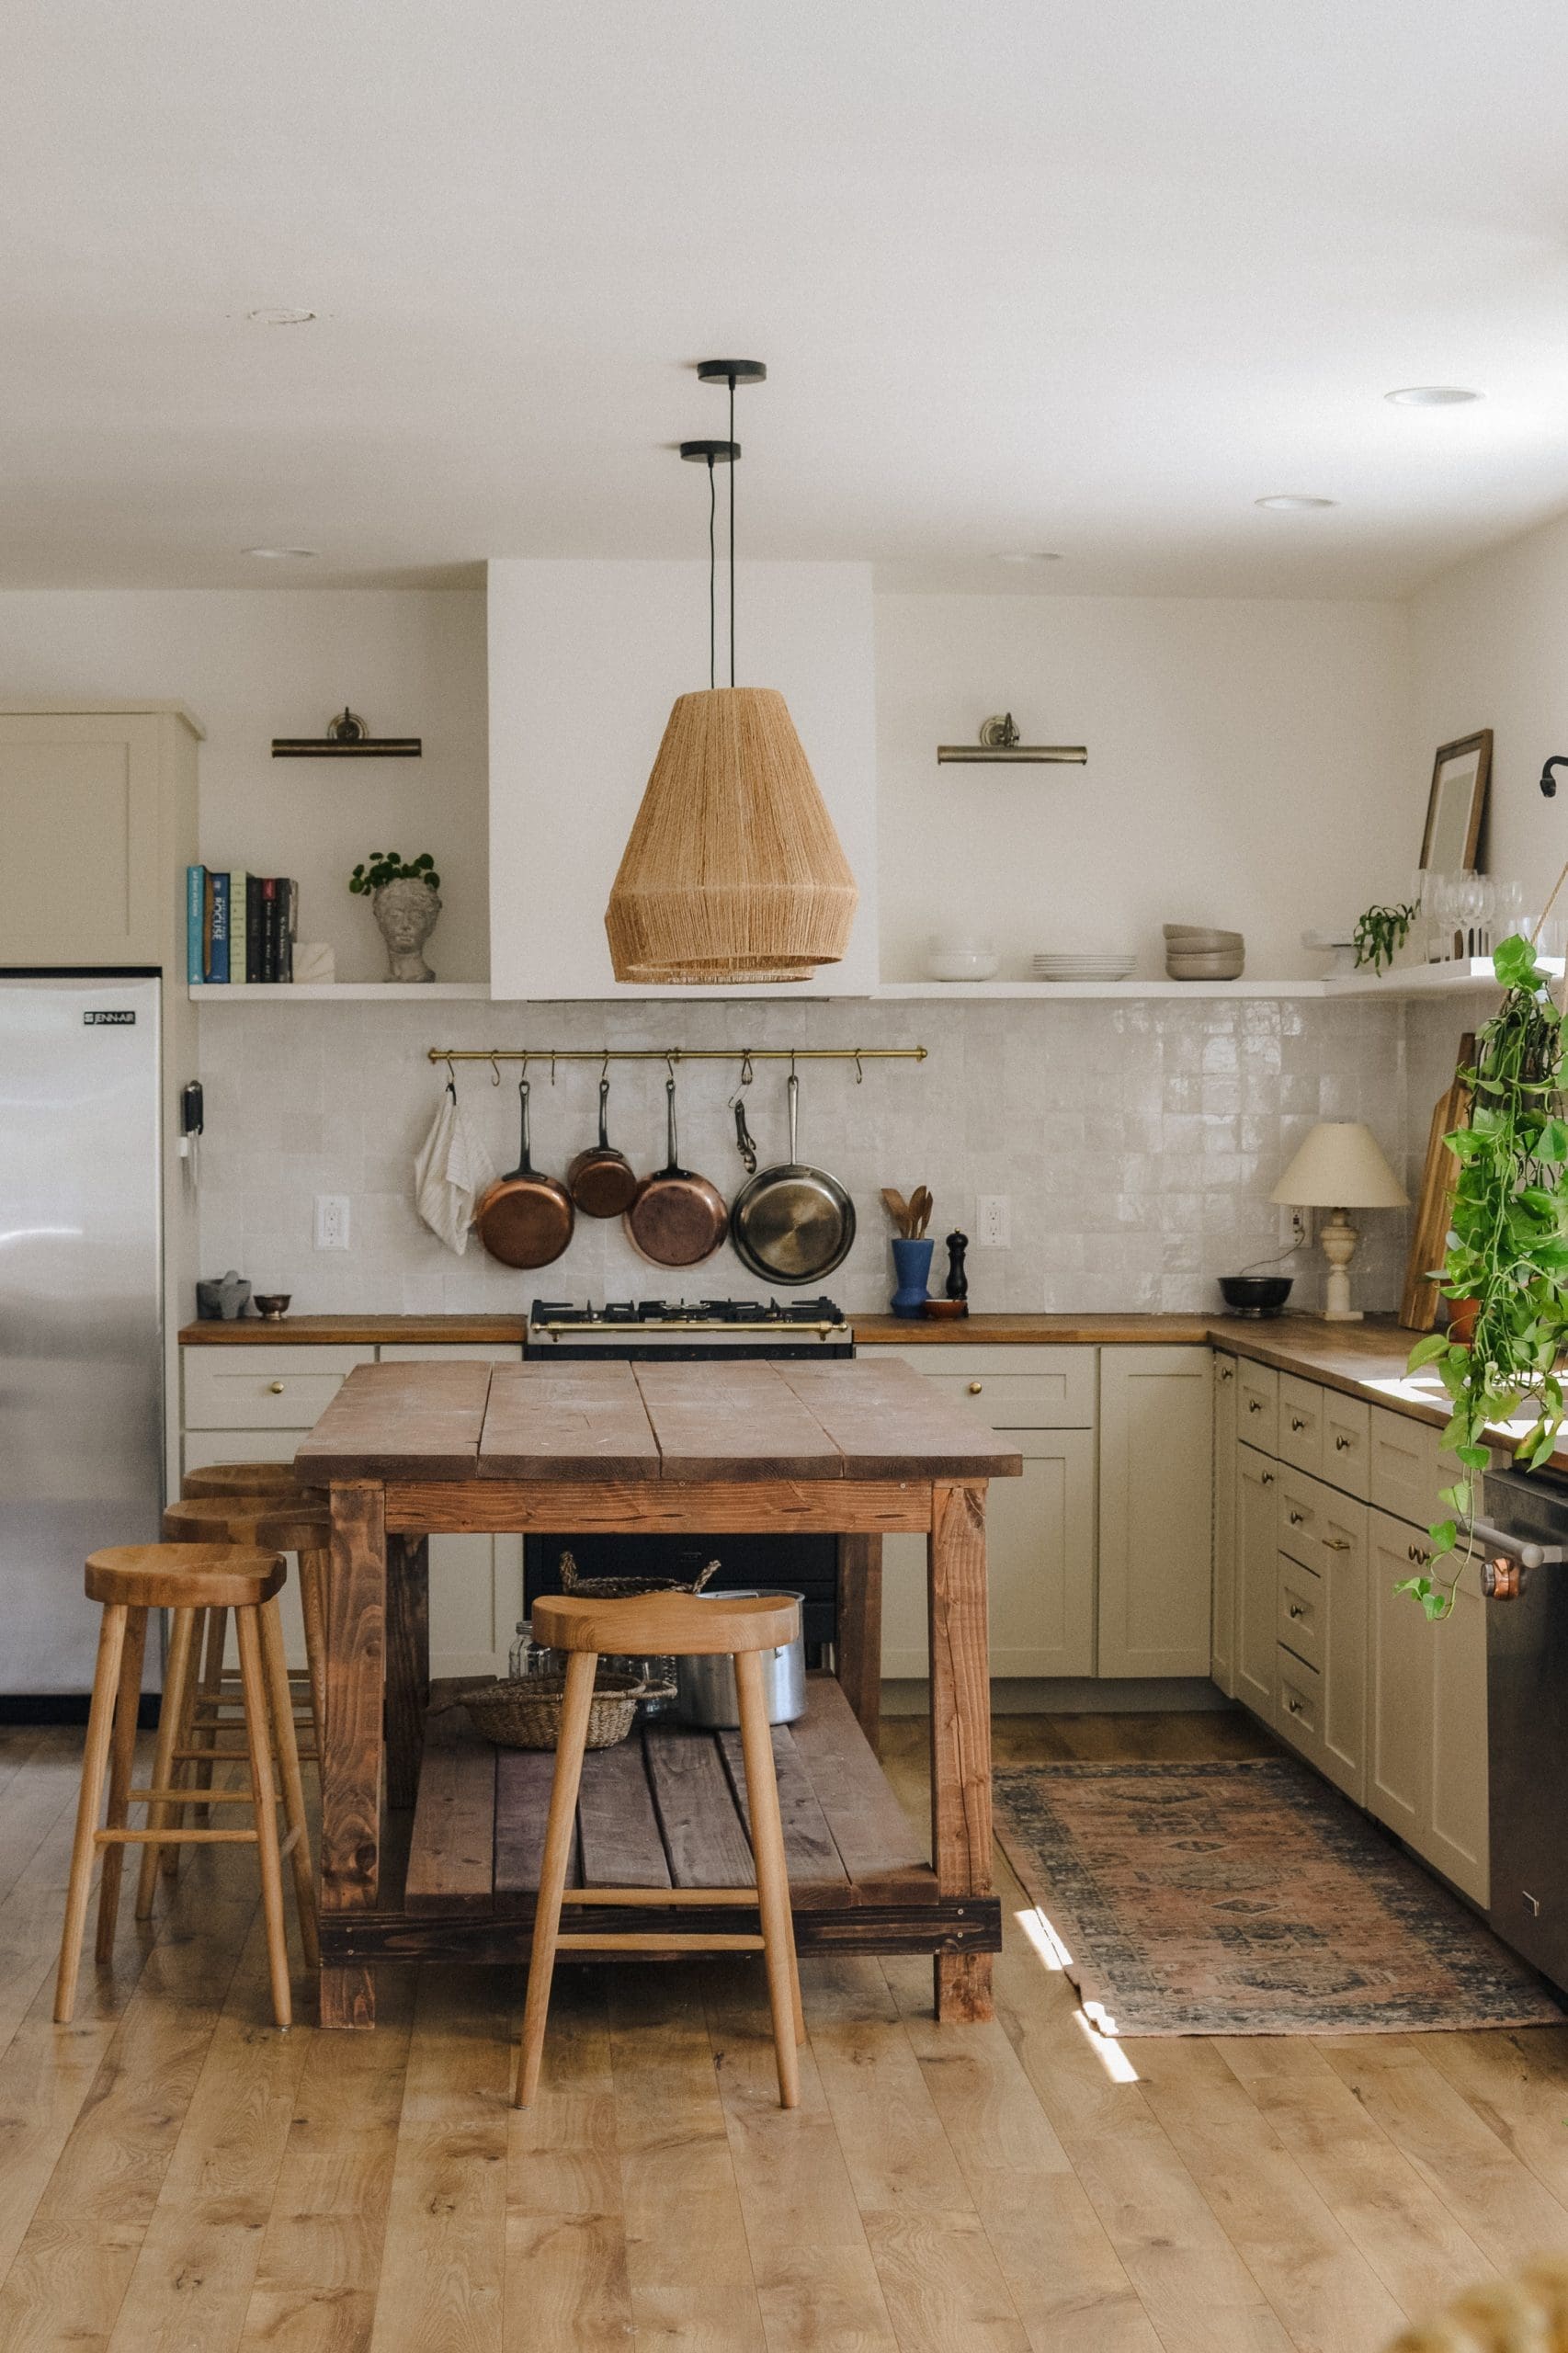 A rustic kitchen with a country-style look and feel